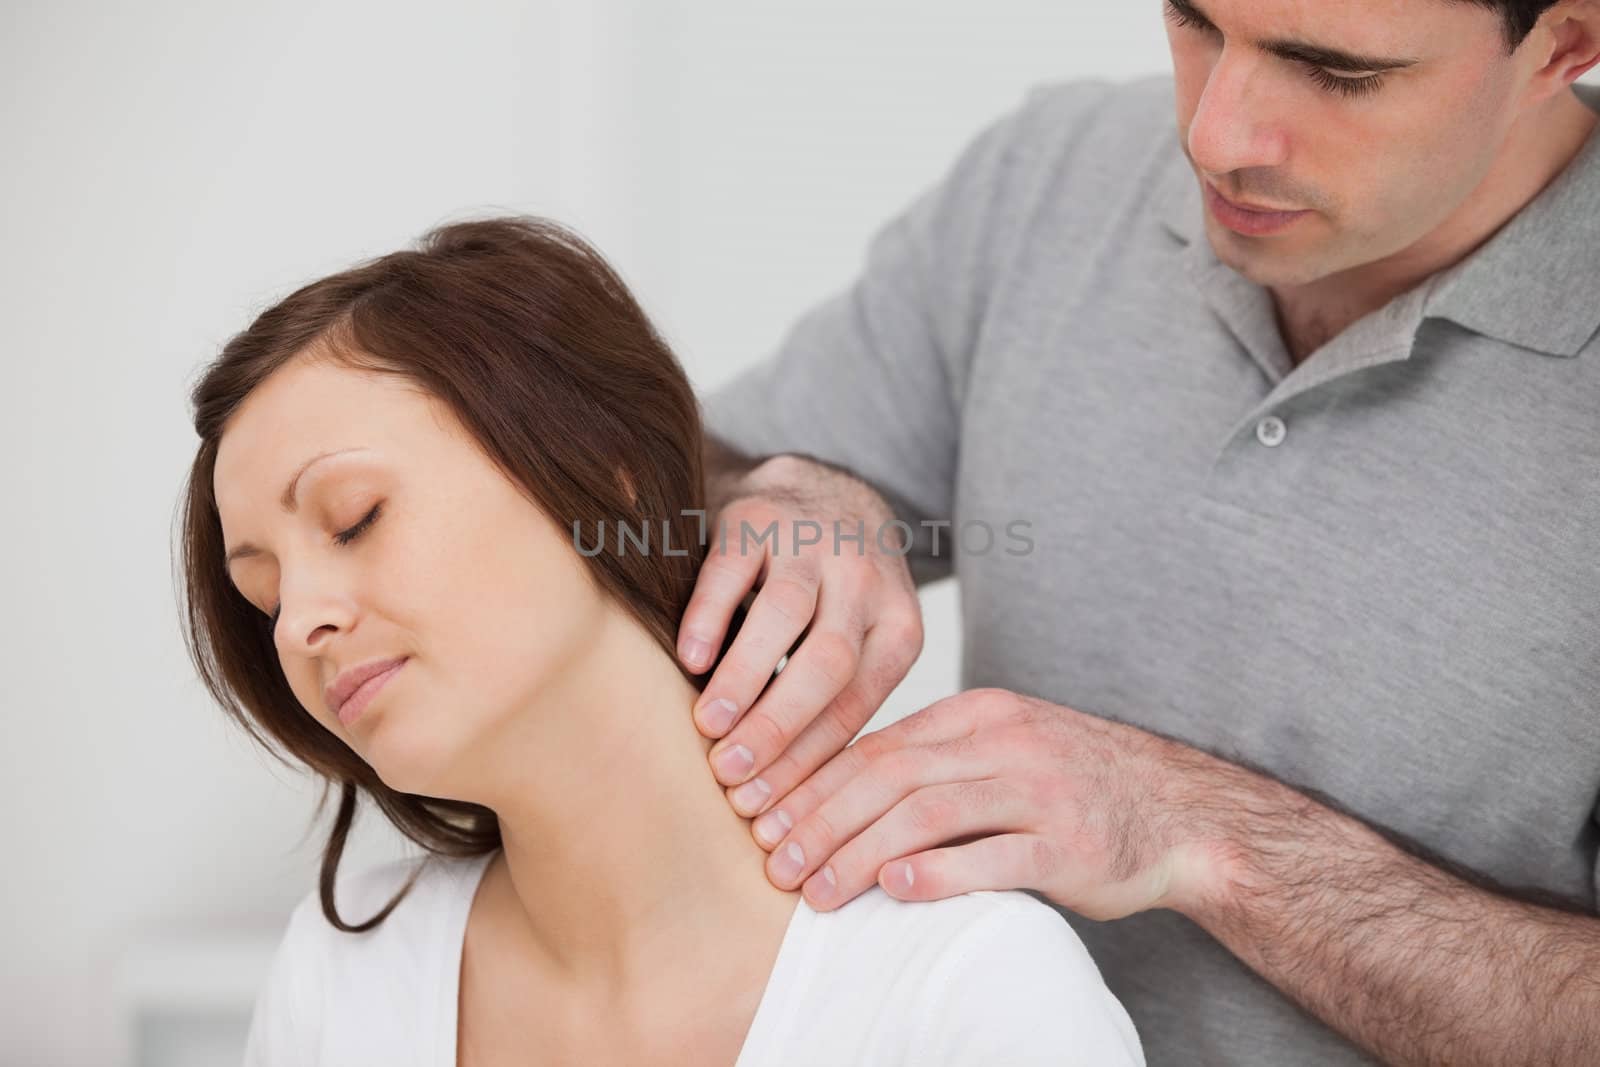 Man massaging the neck of his patient in a medical room